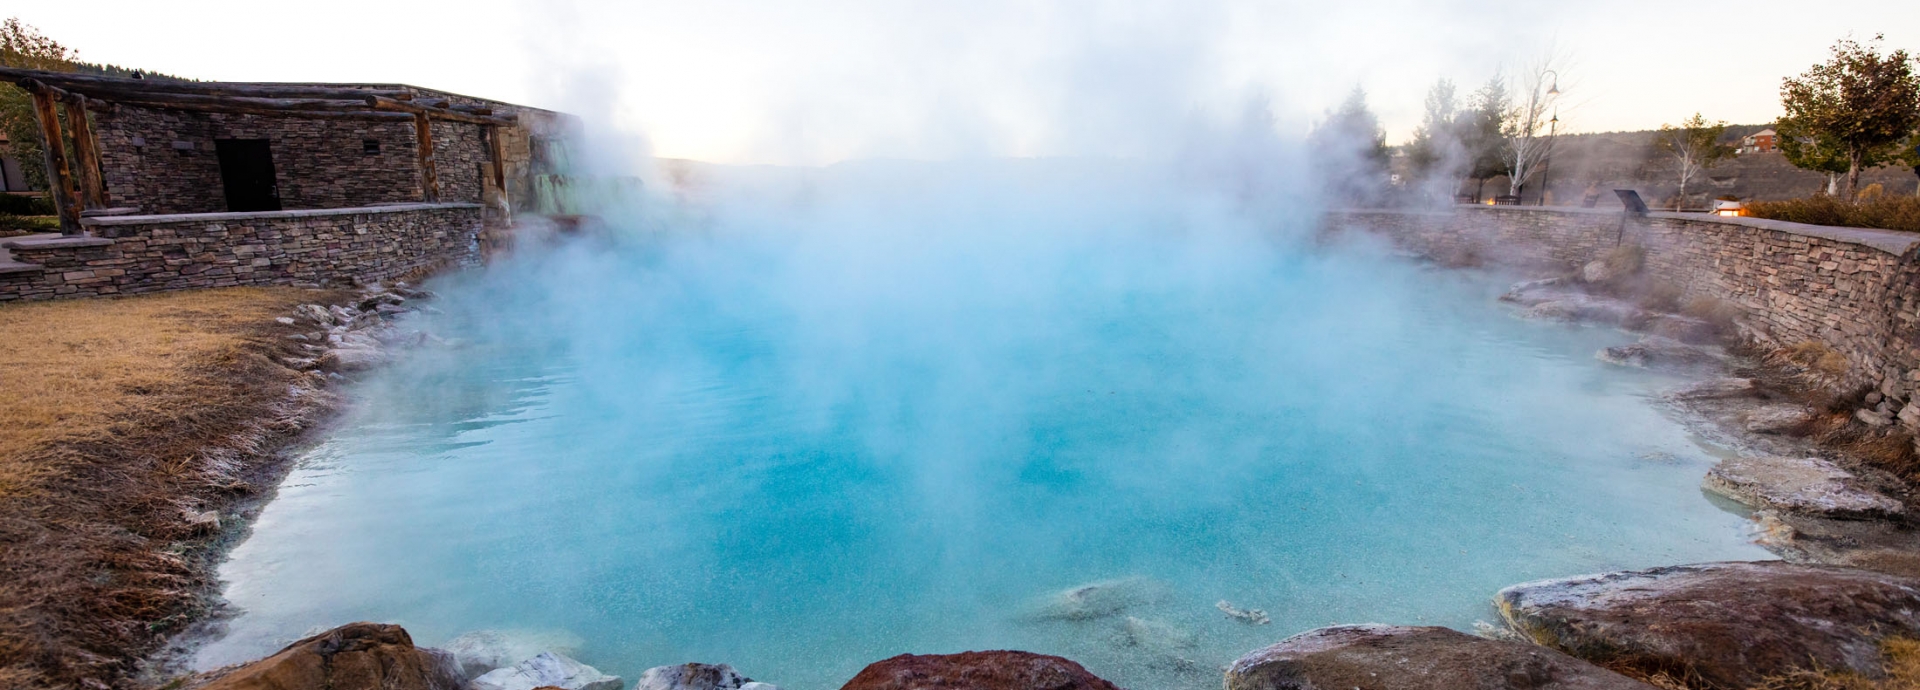 The health benefits of hot springs